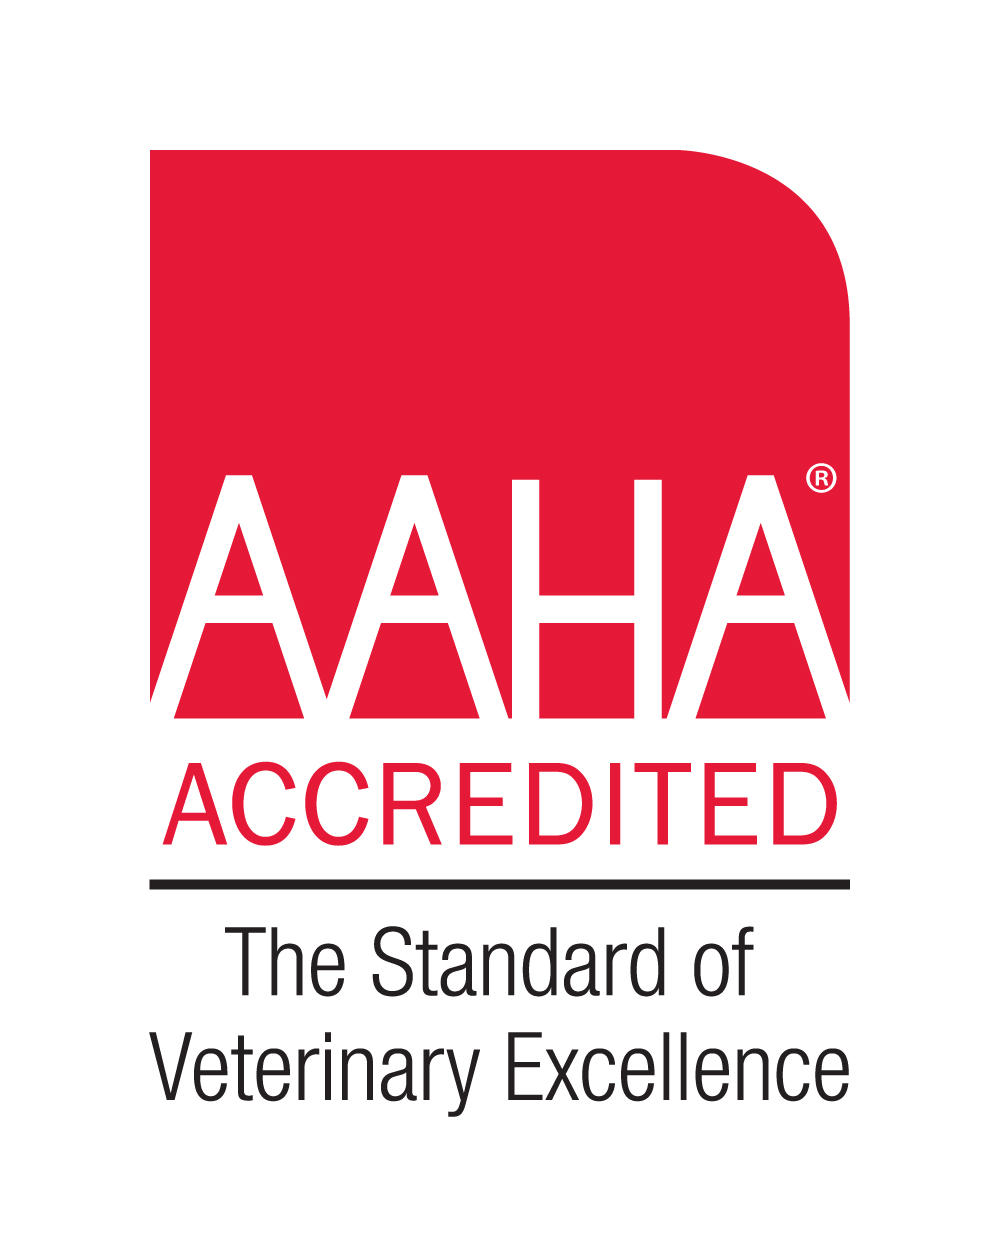 We are AAHA Accredited.